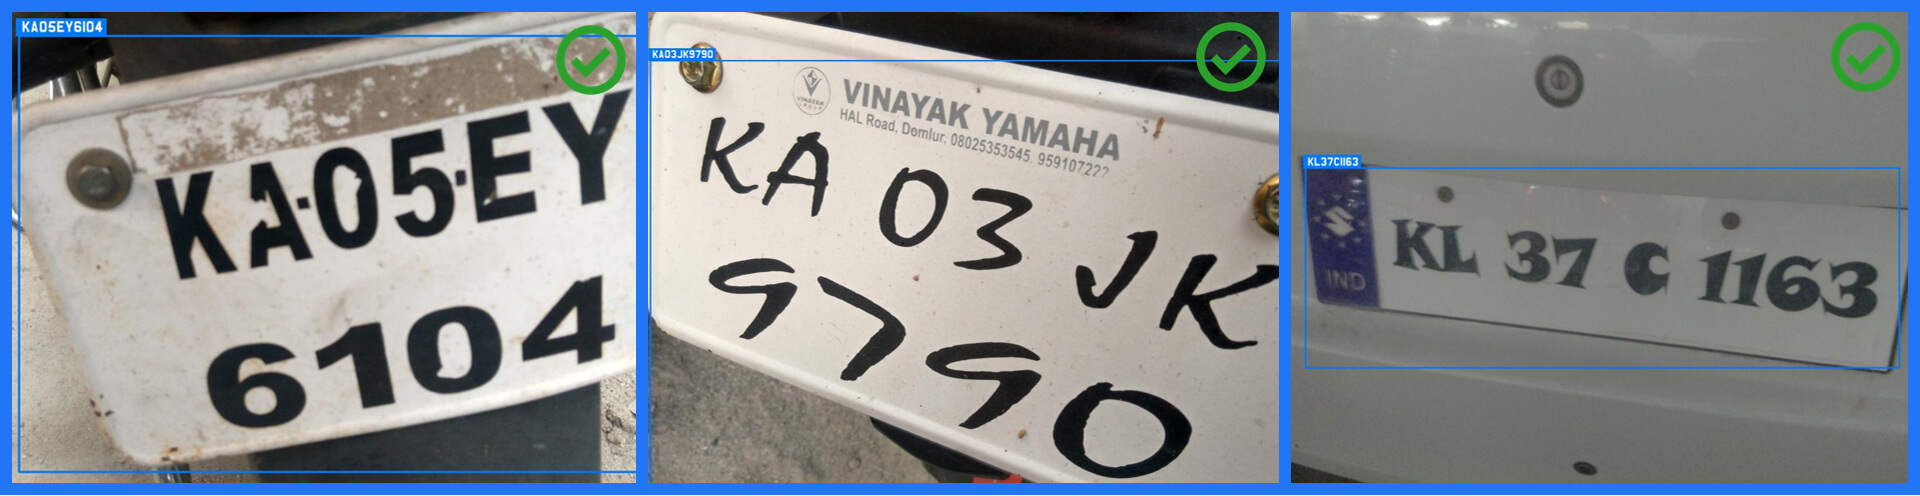 ALPR ANPR Results License Plates with tough characters